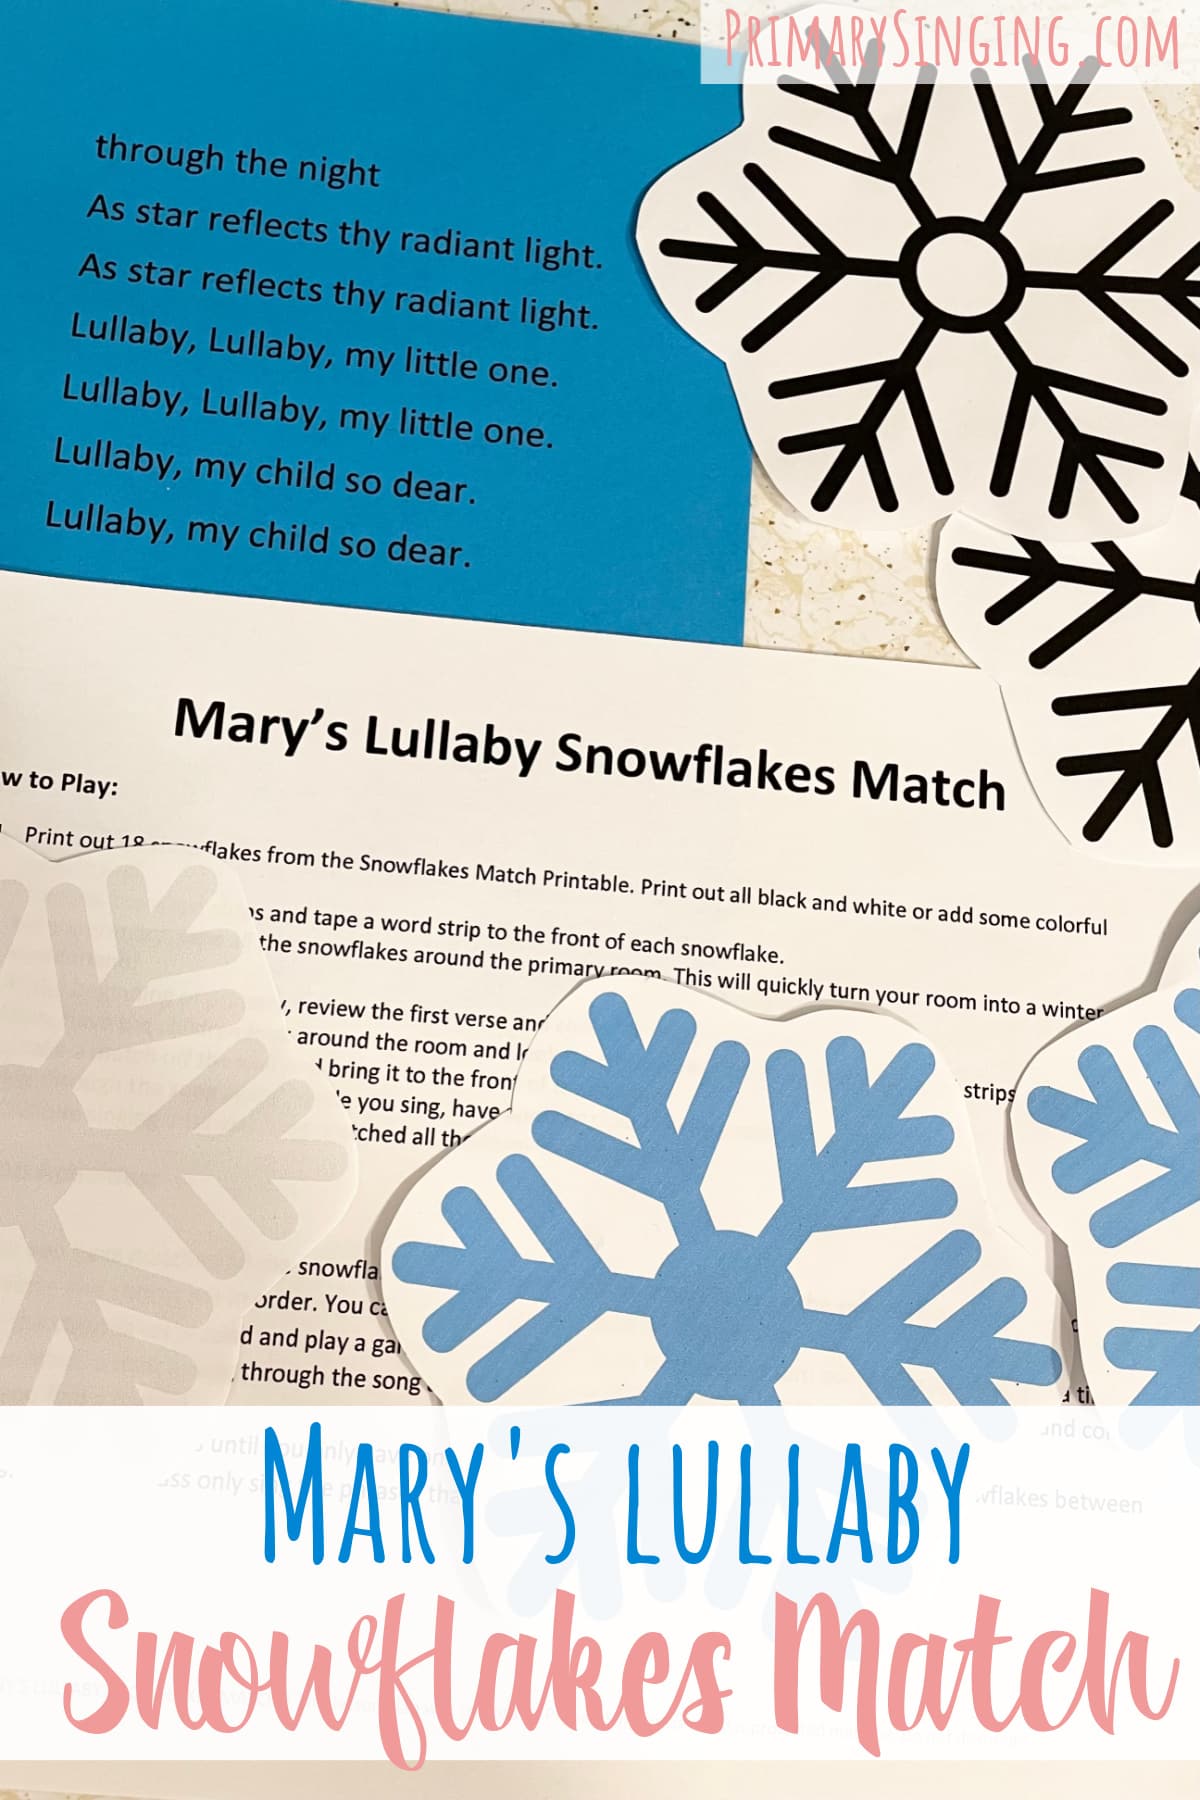 Mary's Lullaby Snowflakes Match Singing time ideas for Primary Music Leaders Marys Lullaby Snowflakes Match